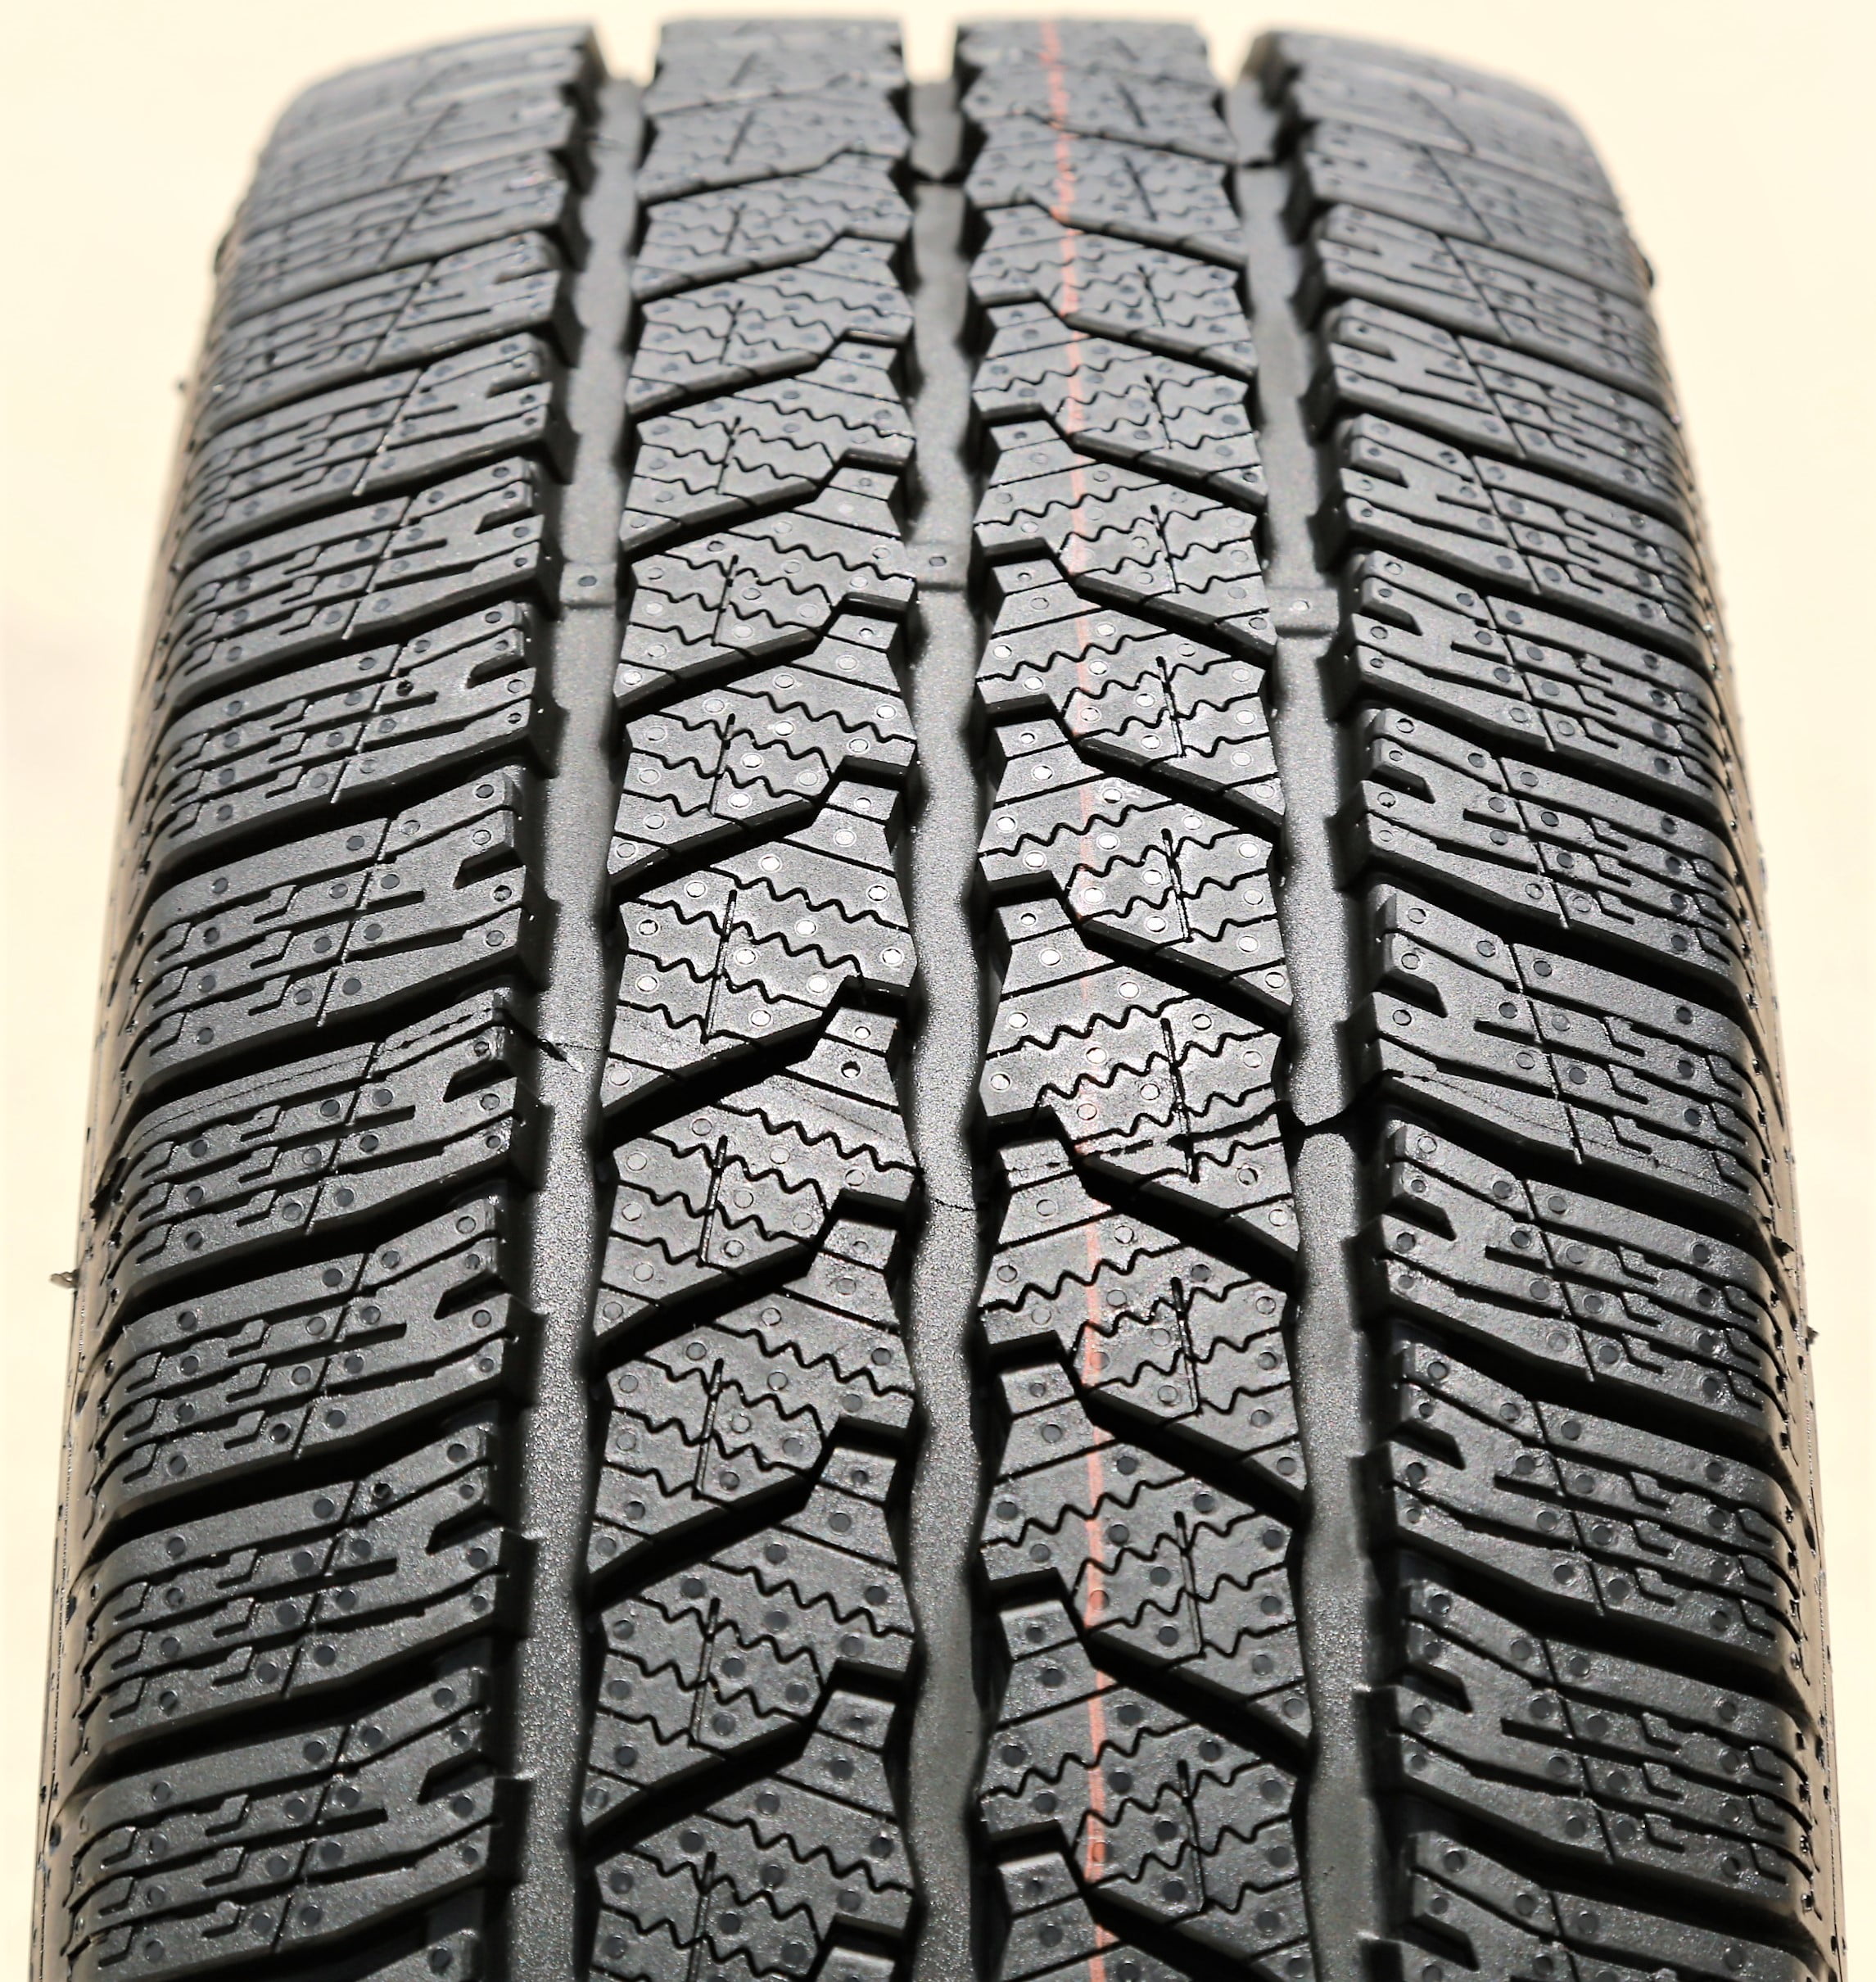 Pair of 2 (TWO) Continental VanContact Winter LT 245/75R16 E 10 Ply (MO)  (Studless) Snow Tires Fits: 2000-04 Ford F-150 Lariat, 1994-2002 Dodge Ram  2500 Base